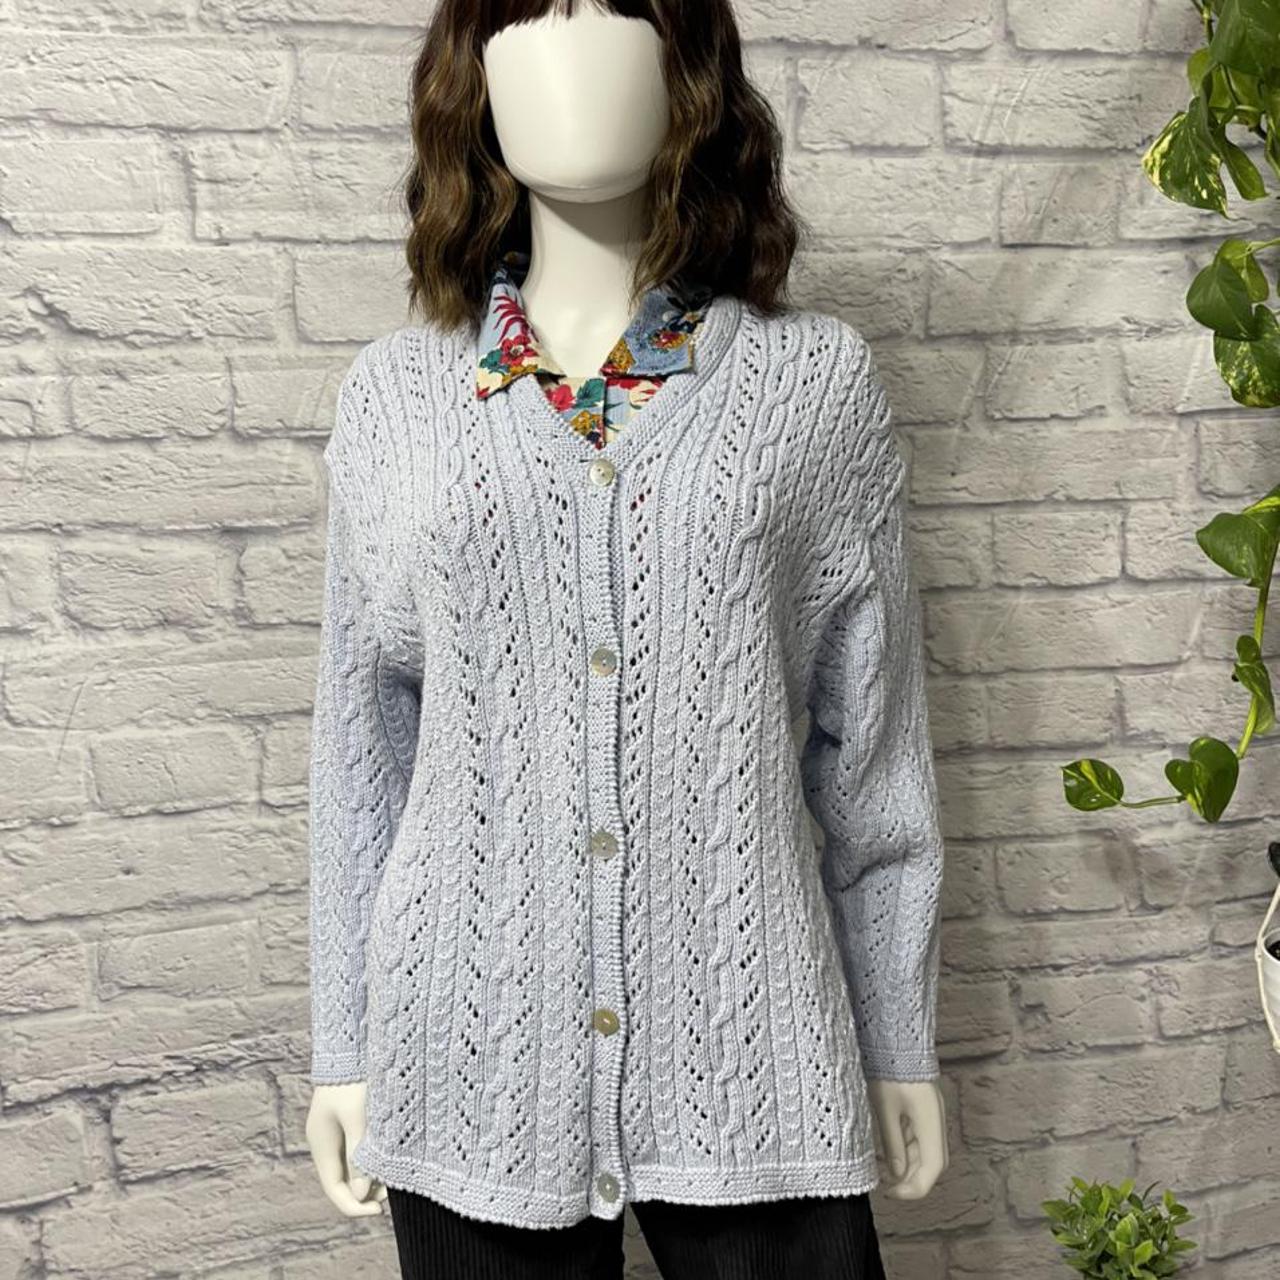 L.L.Bean Women's Blue and White Cardigan